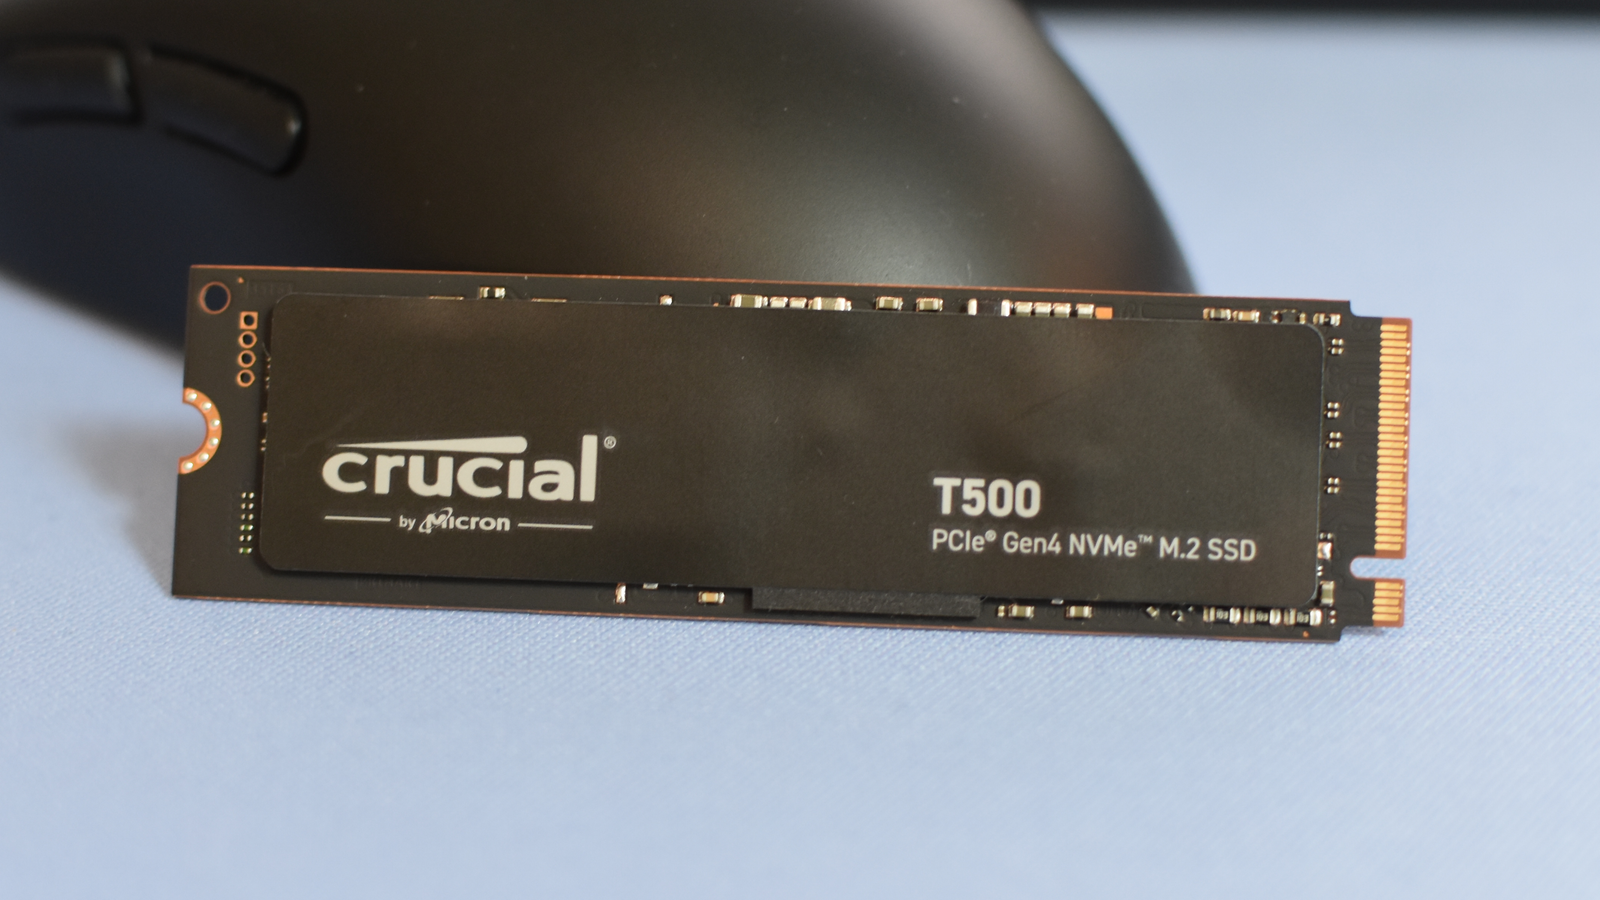 It's practically brand new, but the Crucial T500 SSD is already